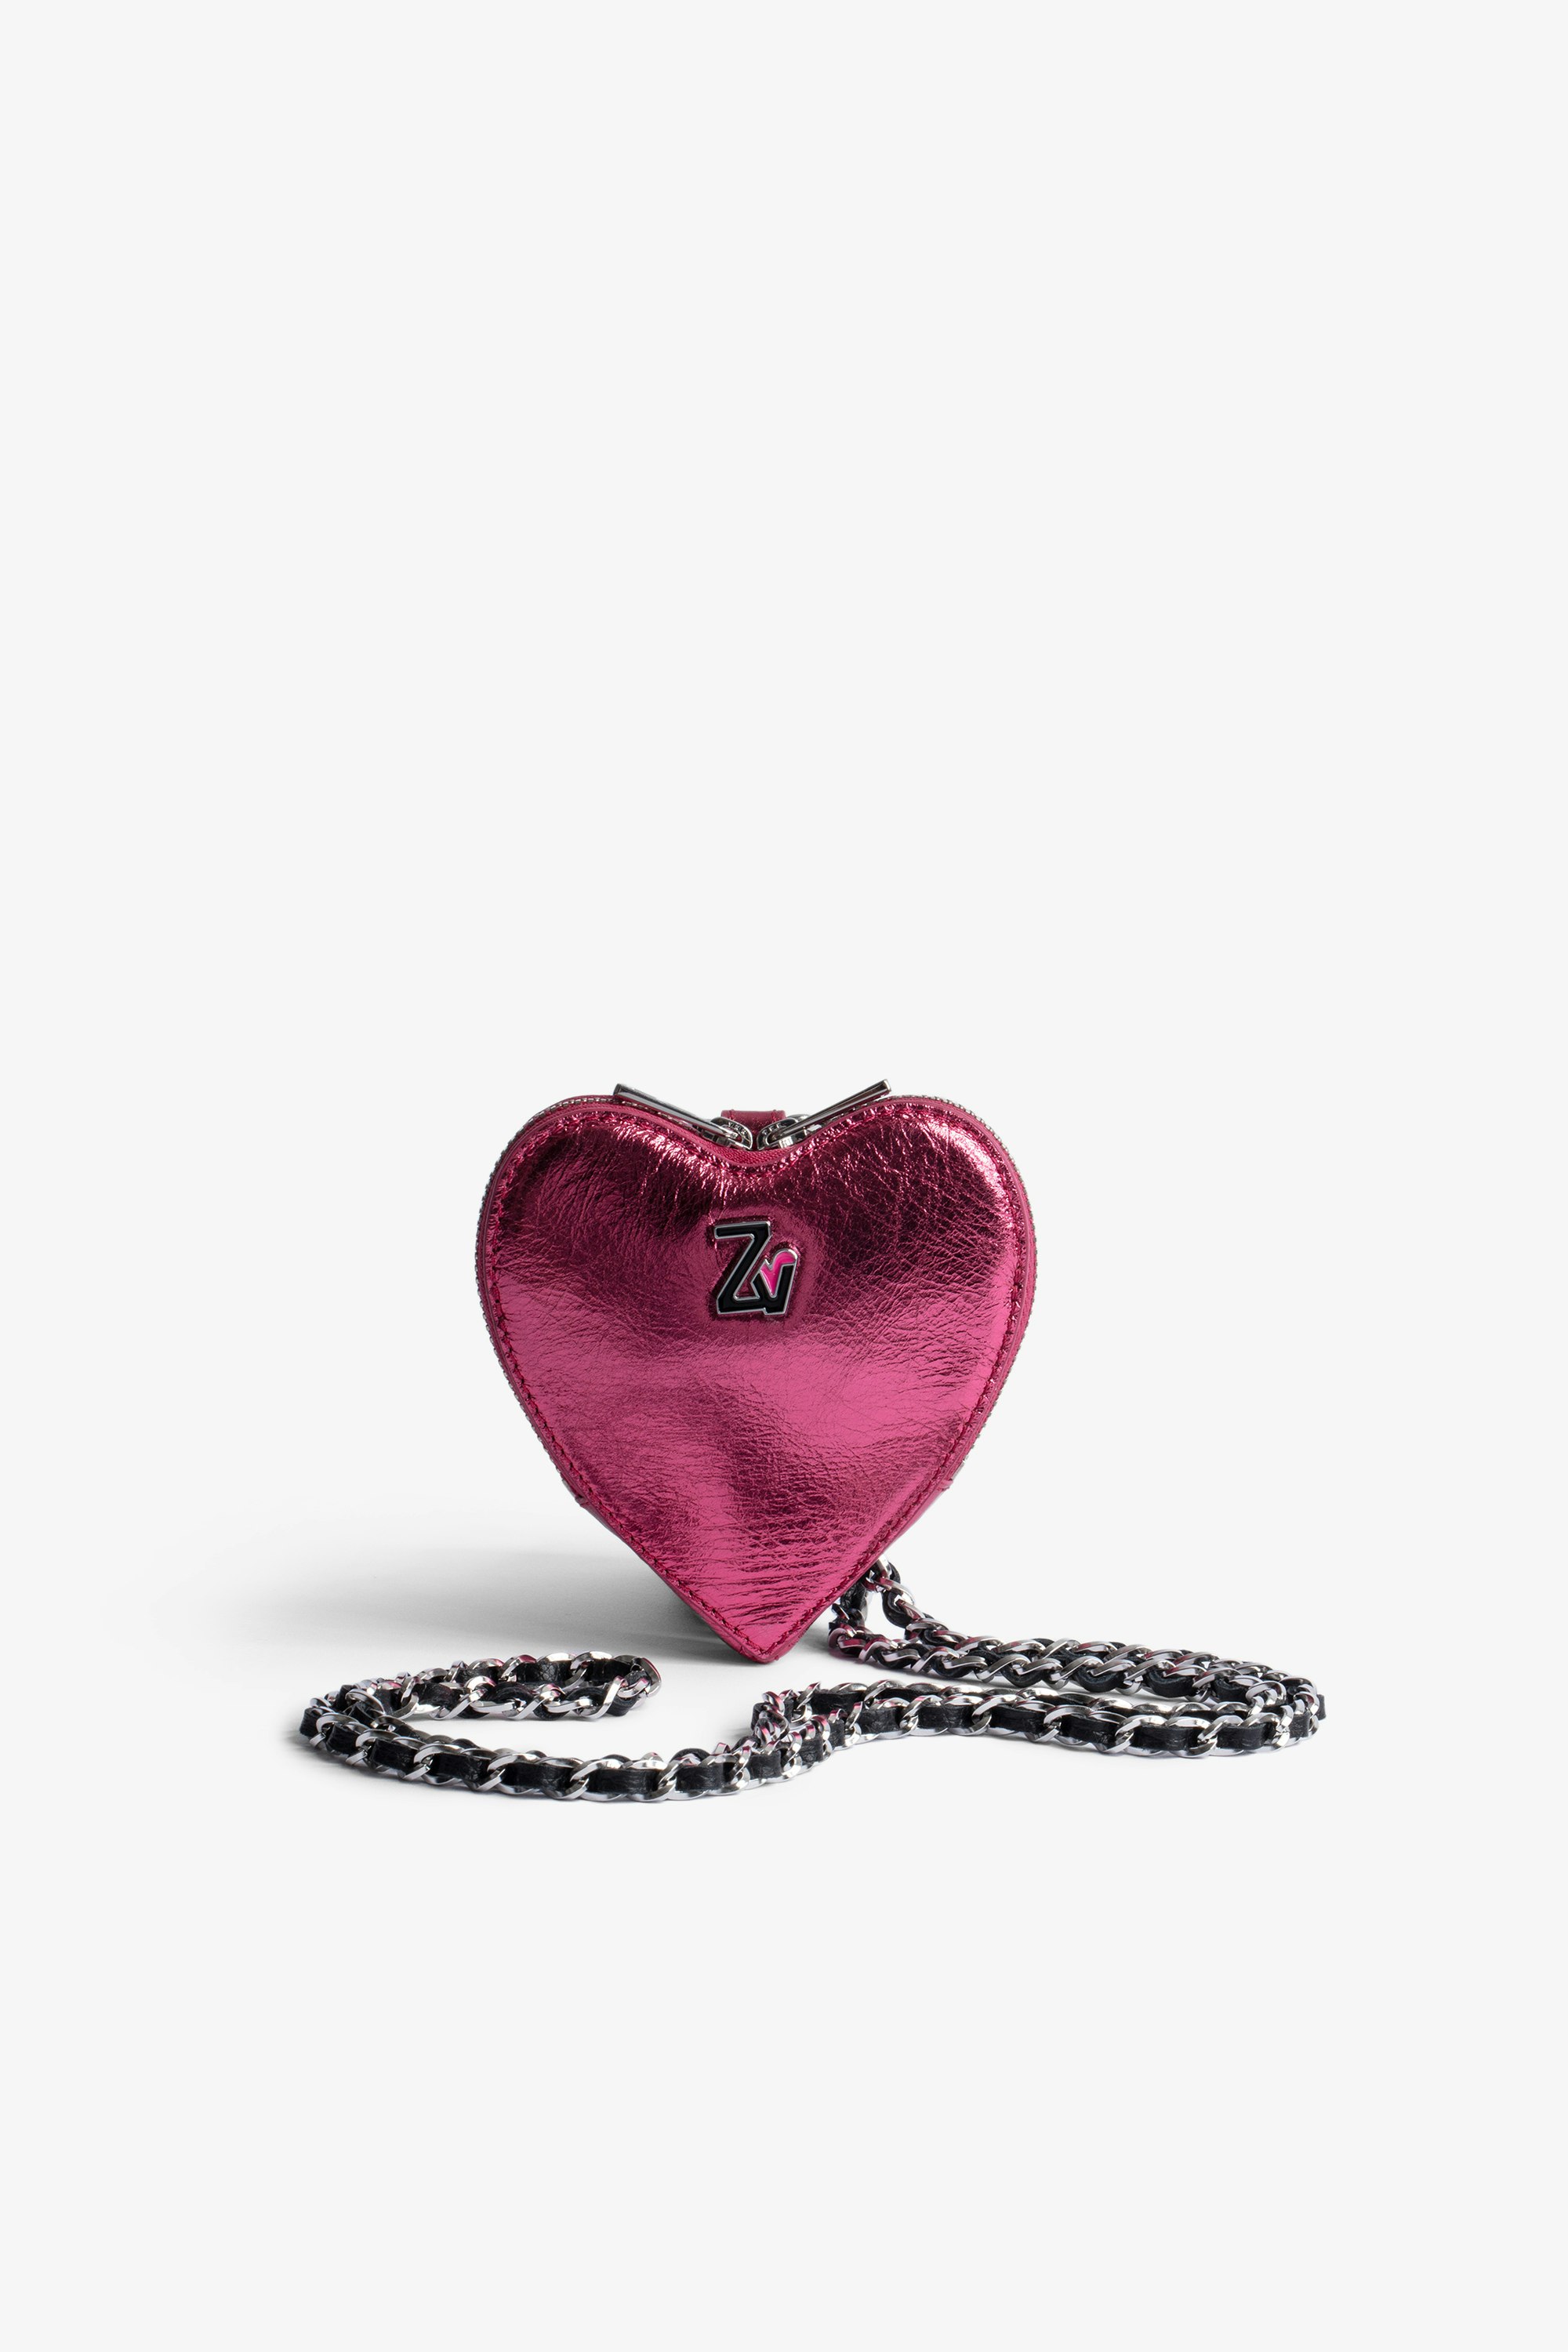 ZV Crush Le Coeur クラッチバッグ Women’s heart clutch with shoulder strap in pink metallic leather